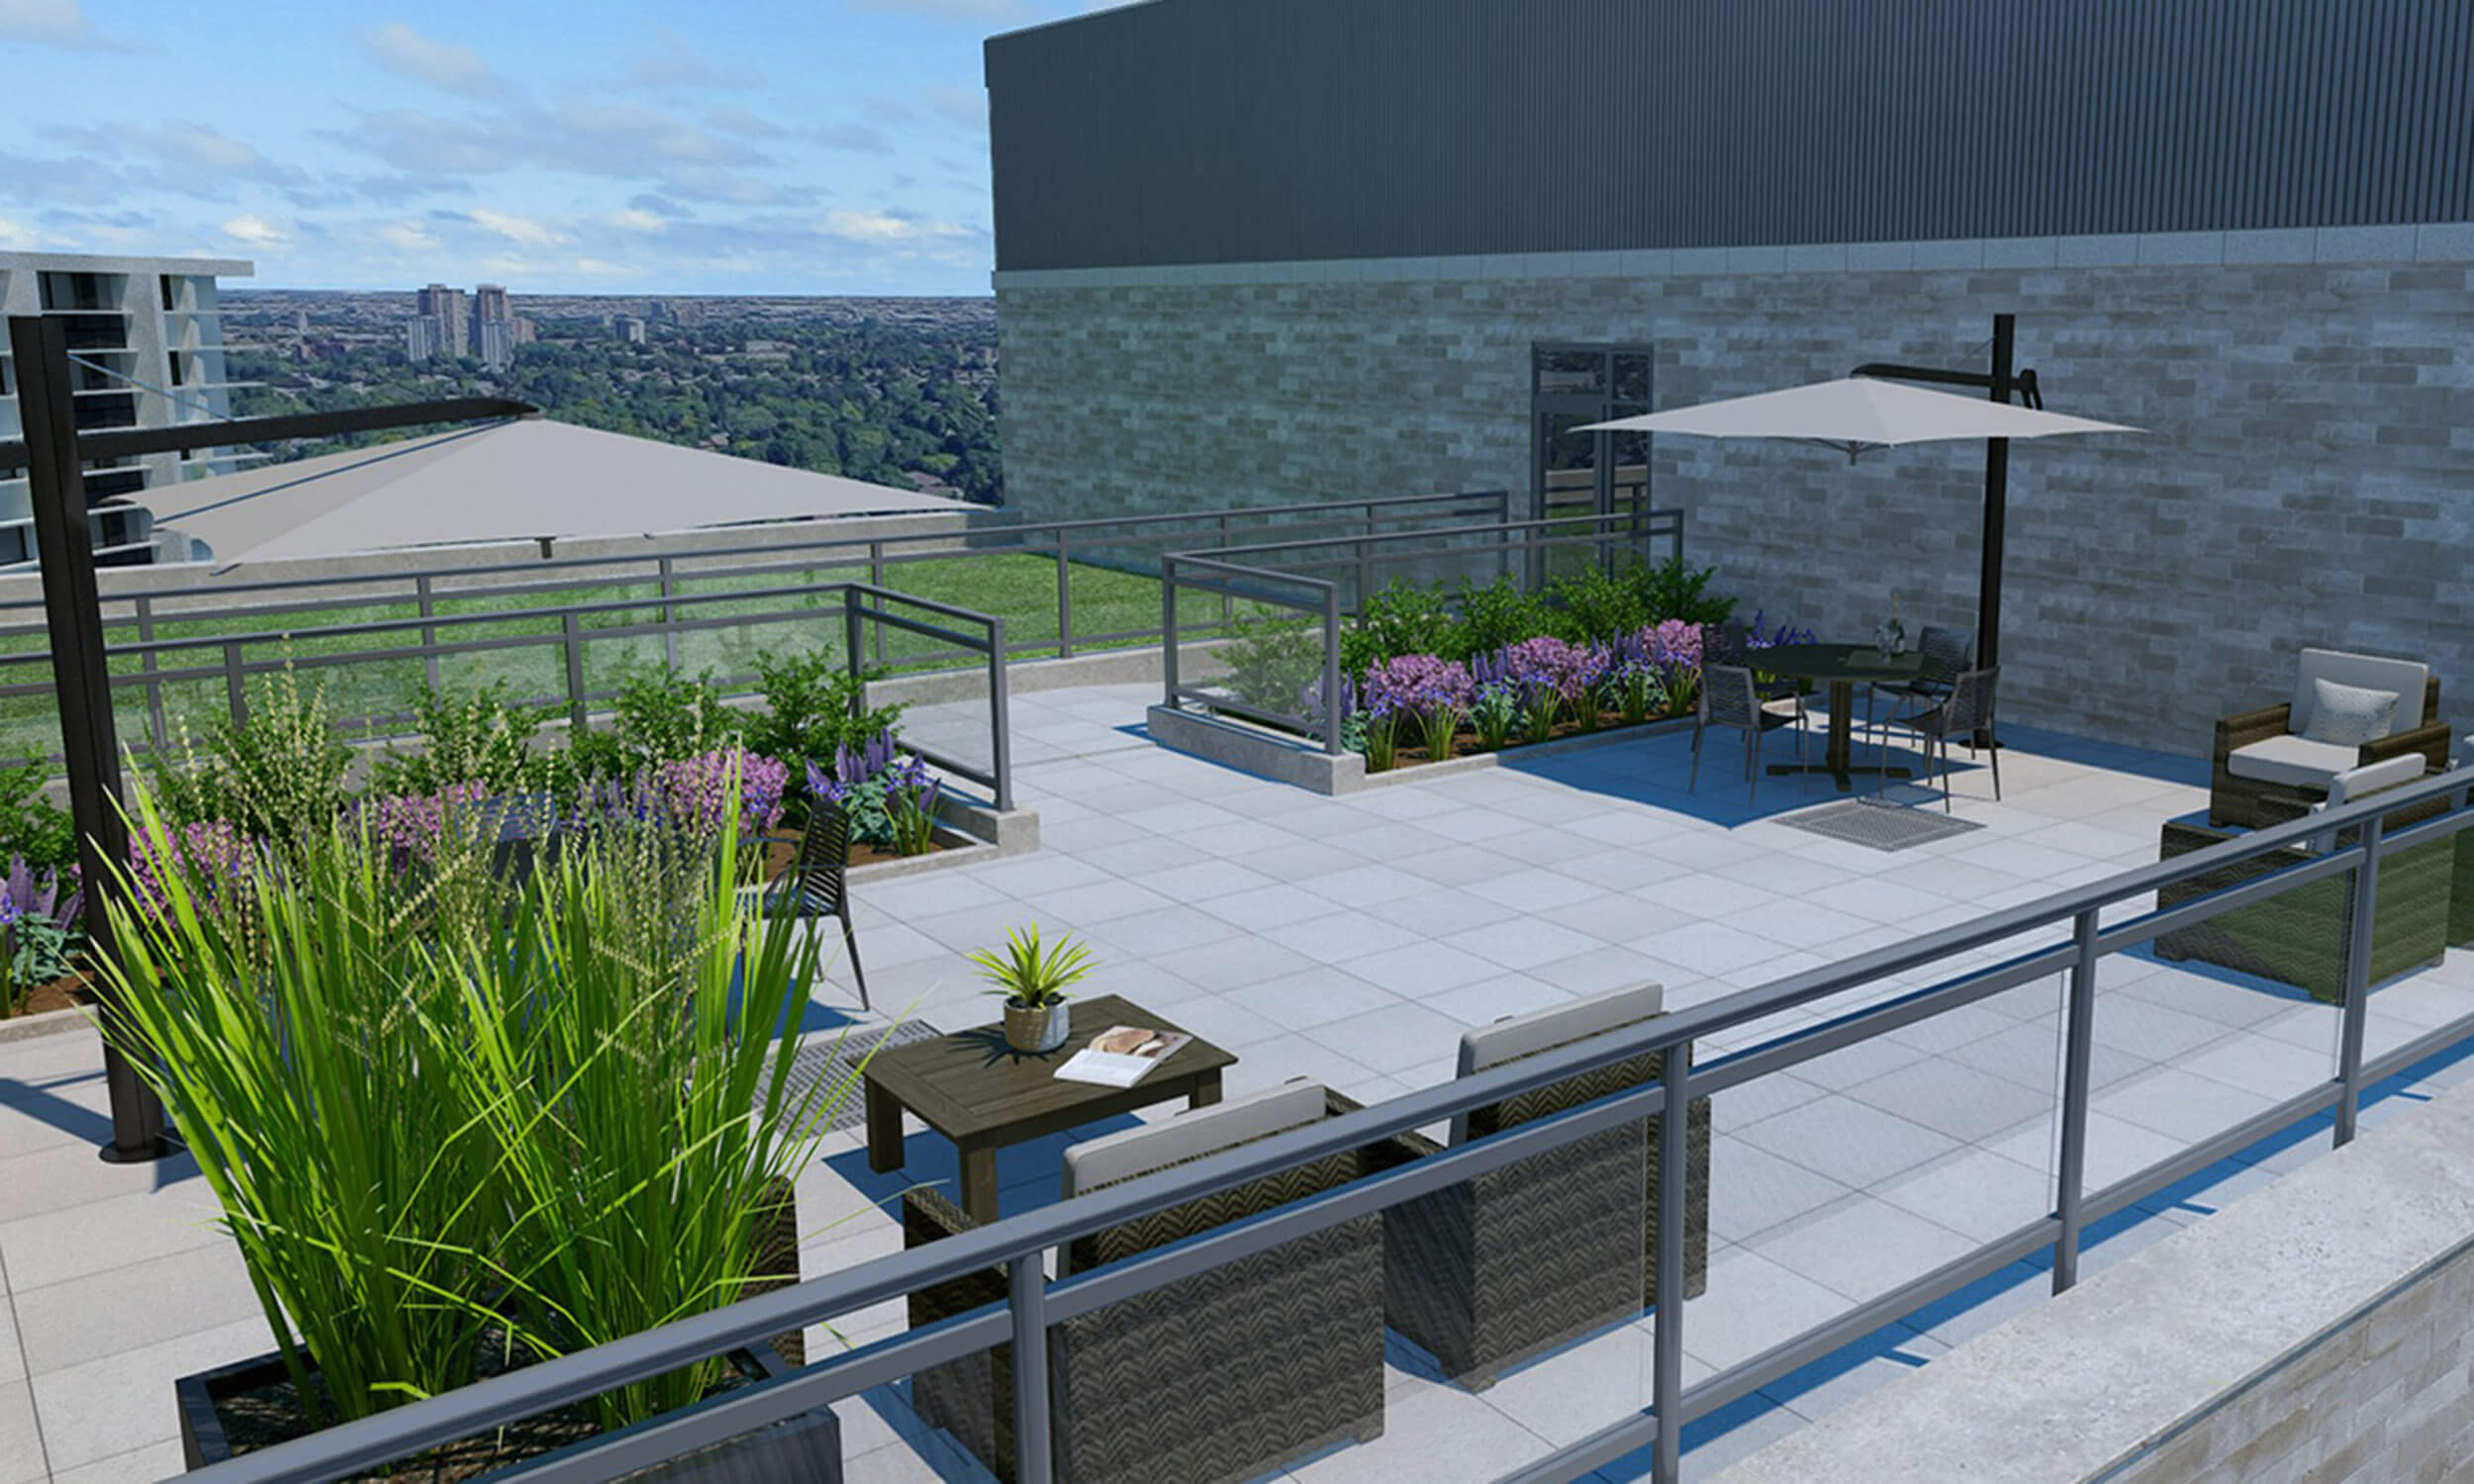 Rooftop patio with outdoor furniture and umbrellas, and garden with flowers and green space, that overlooks cityscape